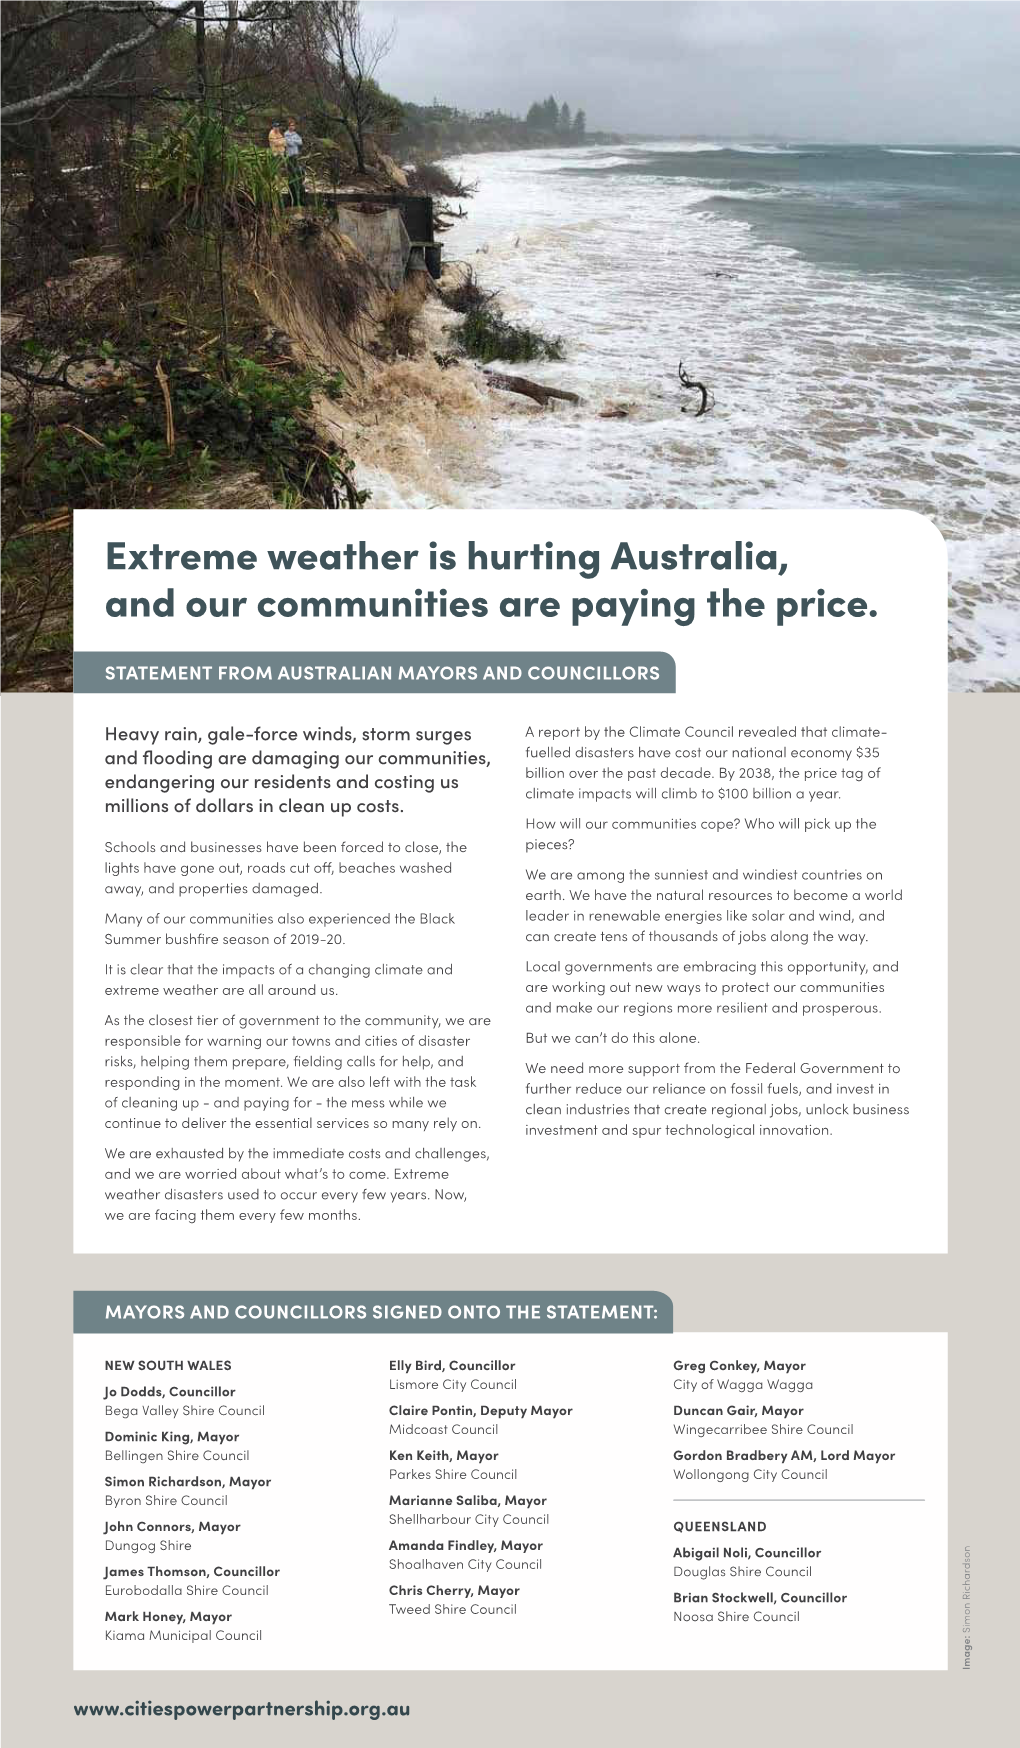 Extreme Weather Is Hurting Australia, and Our Communities Are Paying the Price